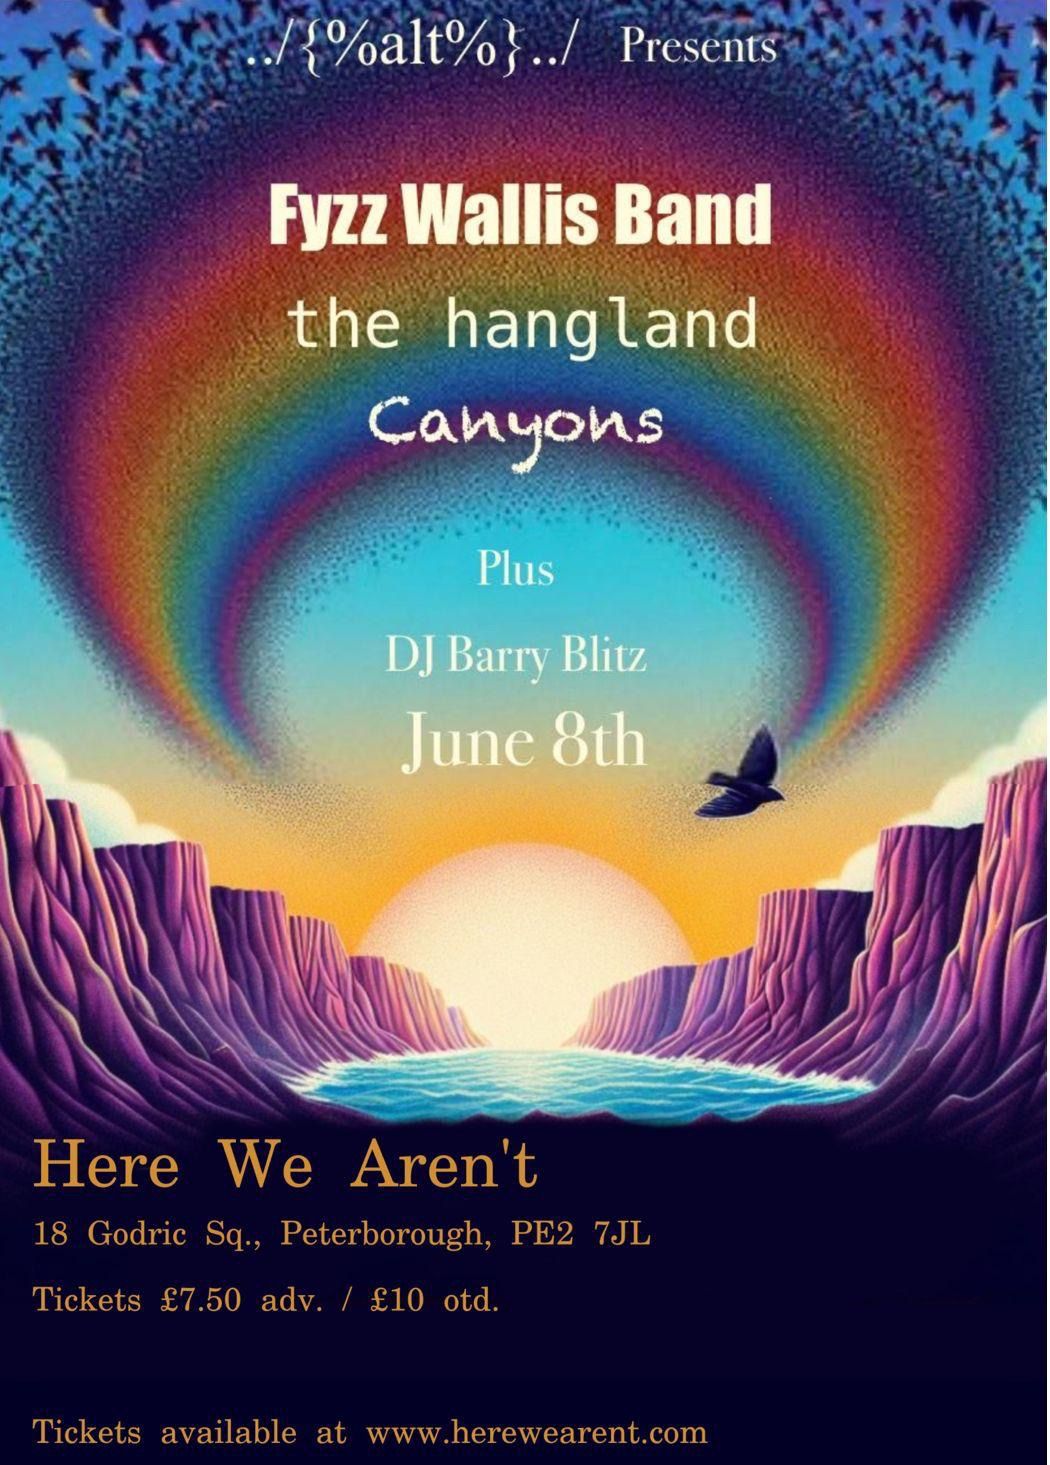 \u2018alt\u2019 presents The Fyzz Wallis band, The Hangland and Canyons at Here We Arent